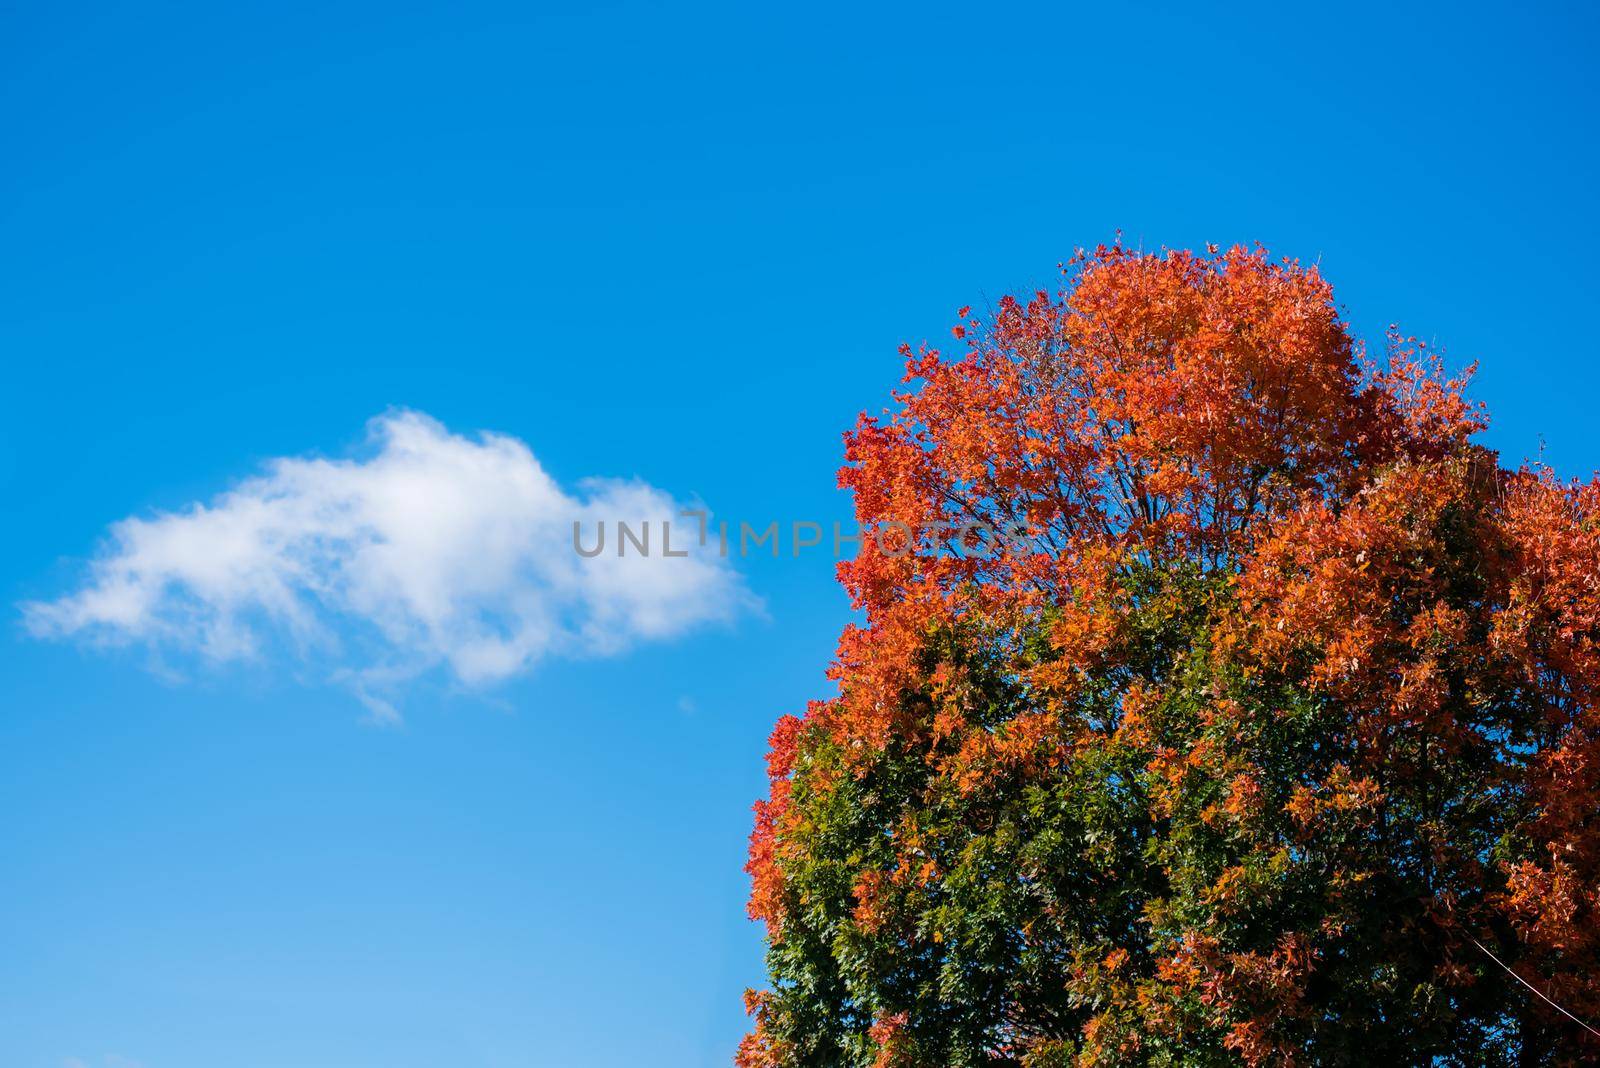 Colorful autumn tree with vibrant orange leaves against a blue sky with one cloud